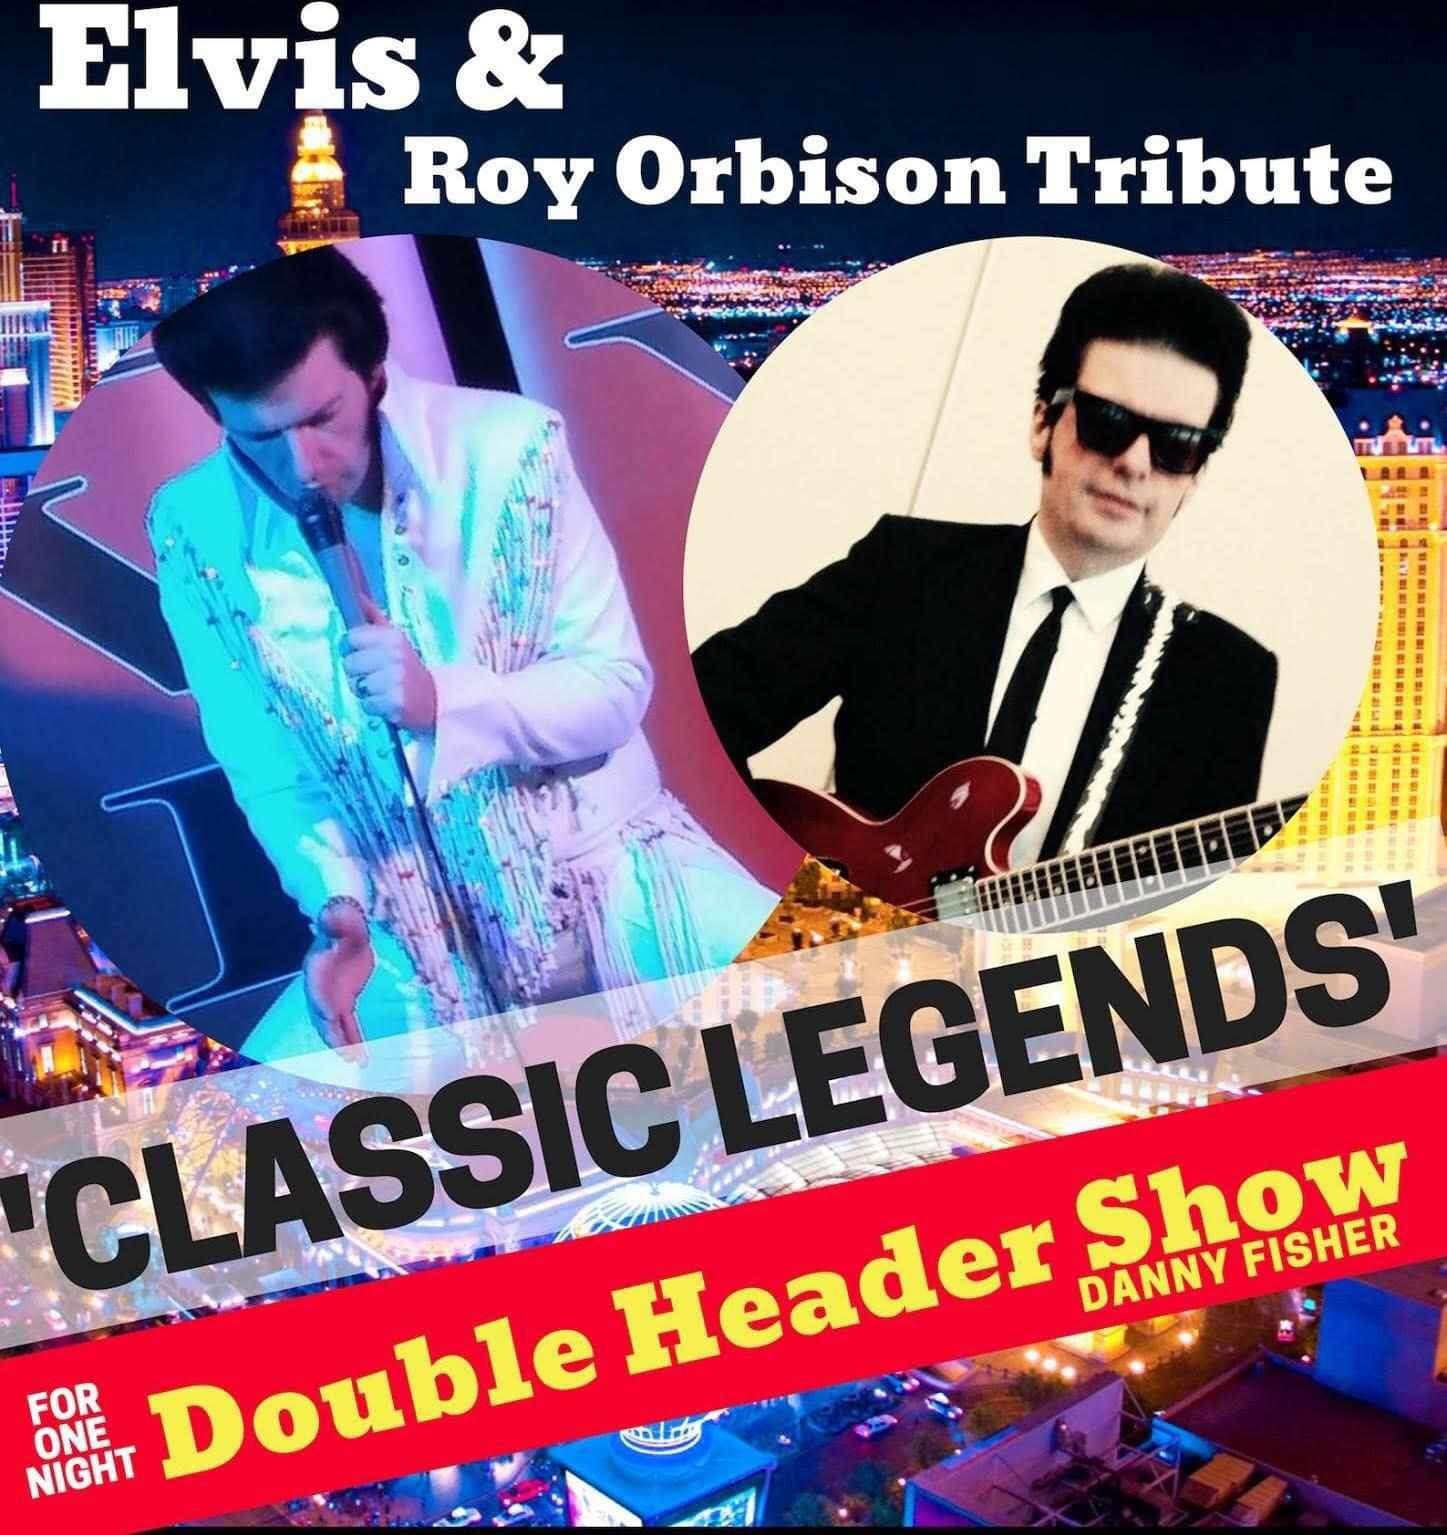 Roy Orbison v’s Elvis Tribute Night  on Nov 18, 19:30@Falcon hotel whittlesey - Buy tickets and Get information on whittlesey music nights 